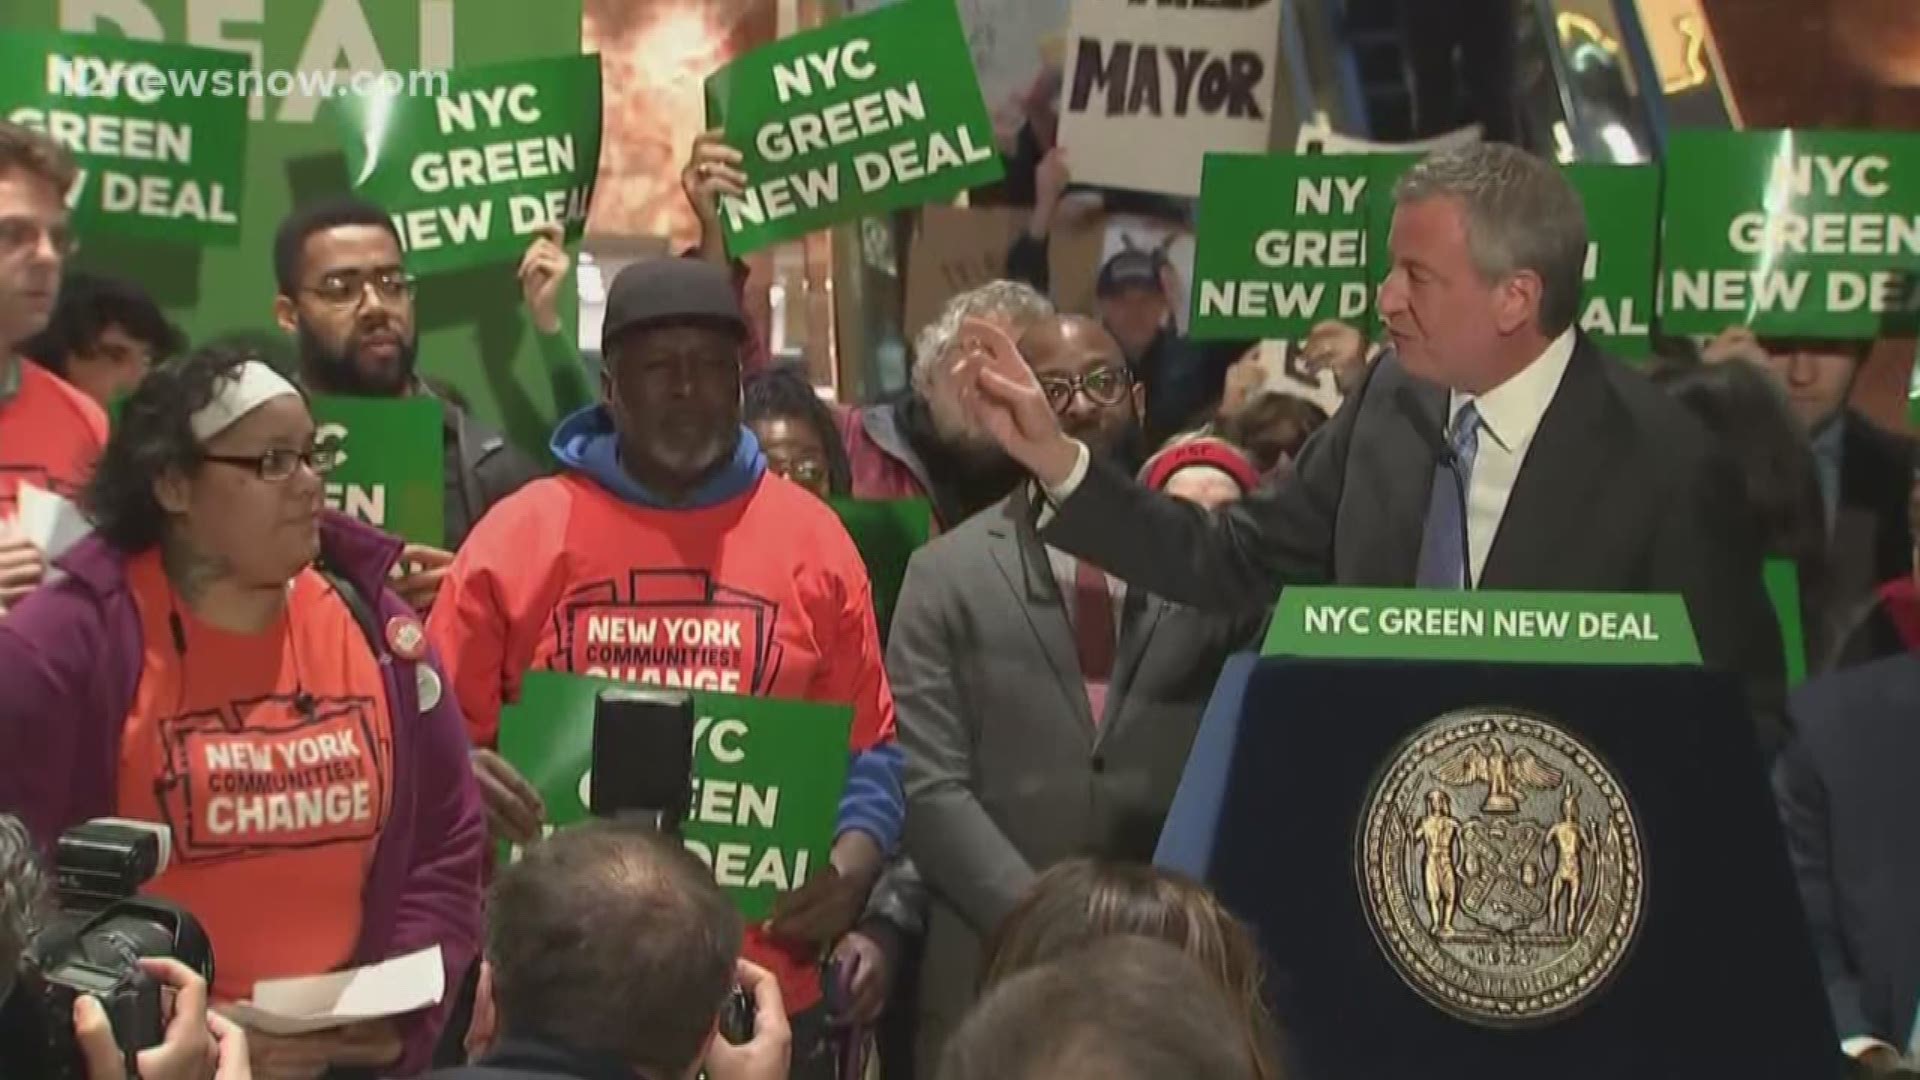 New York City mayor Bill de Blasio announces his bid for the presidency today, joining the almost two dozen other candidates already vying for the Democratic nomination. While mayor for the nation's largest city, de Blasio managed to raise the minimum wage to 15 dollars and saw crime drop to an all-time low. De Blasio will head out on the campaign trail almost immediately following his announcement.